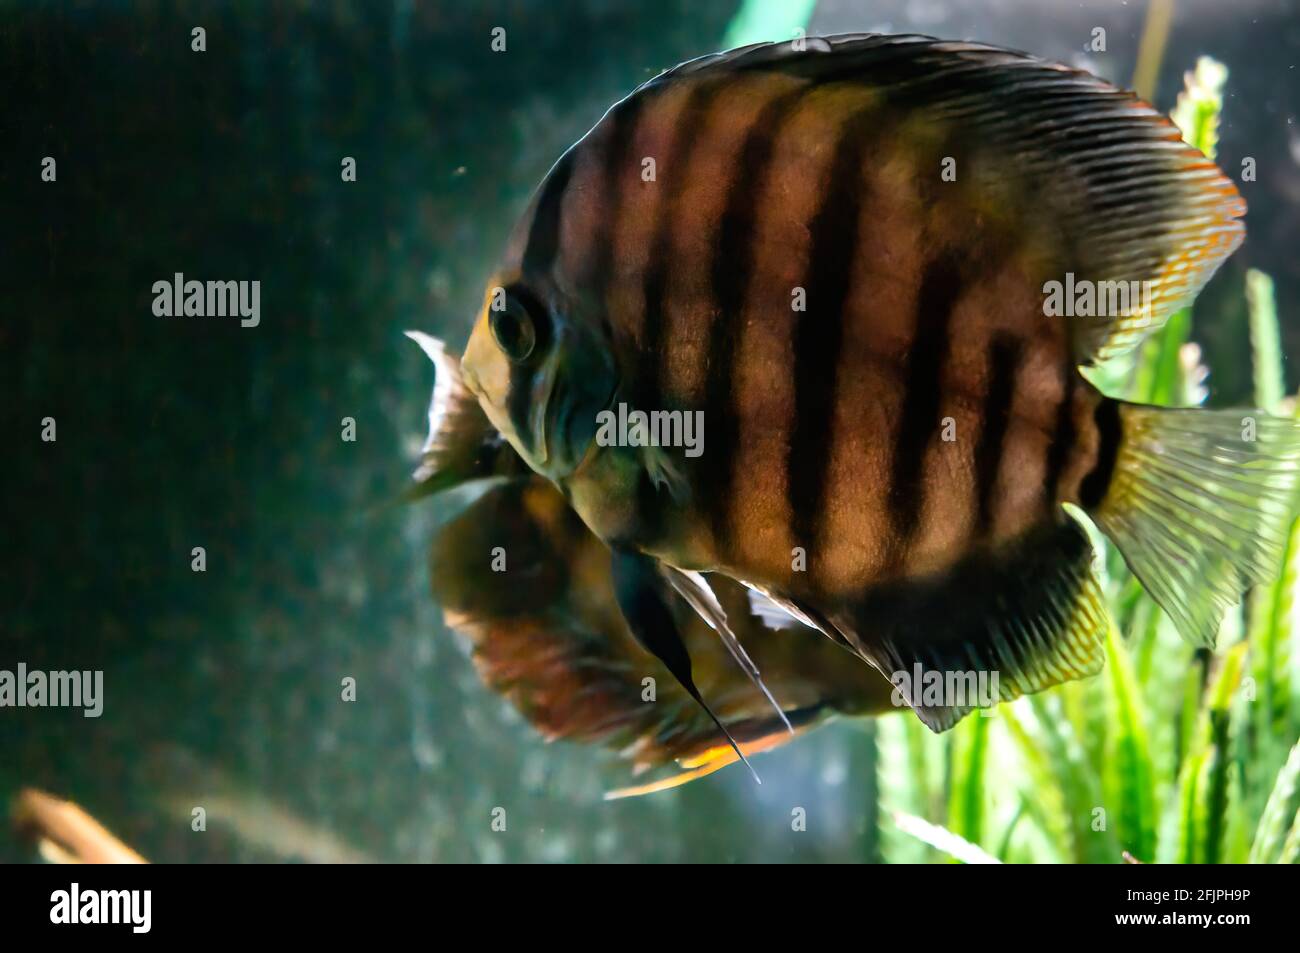 A brown Discus fish (Symphysodon - a genus of cichlids native to the Amazon river basin) swimming in his water tank at Sao Paulo aquarium. Stock Photo